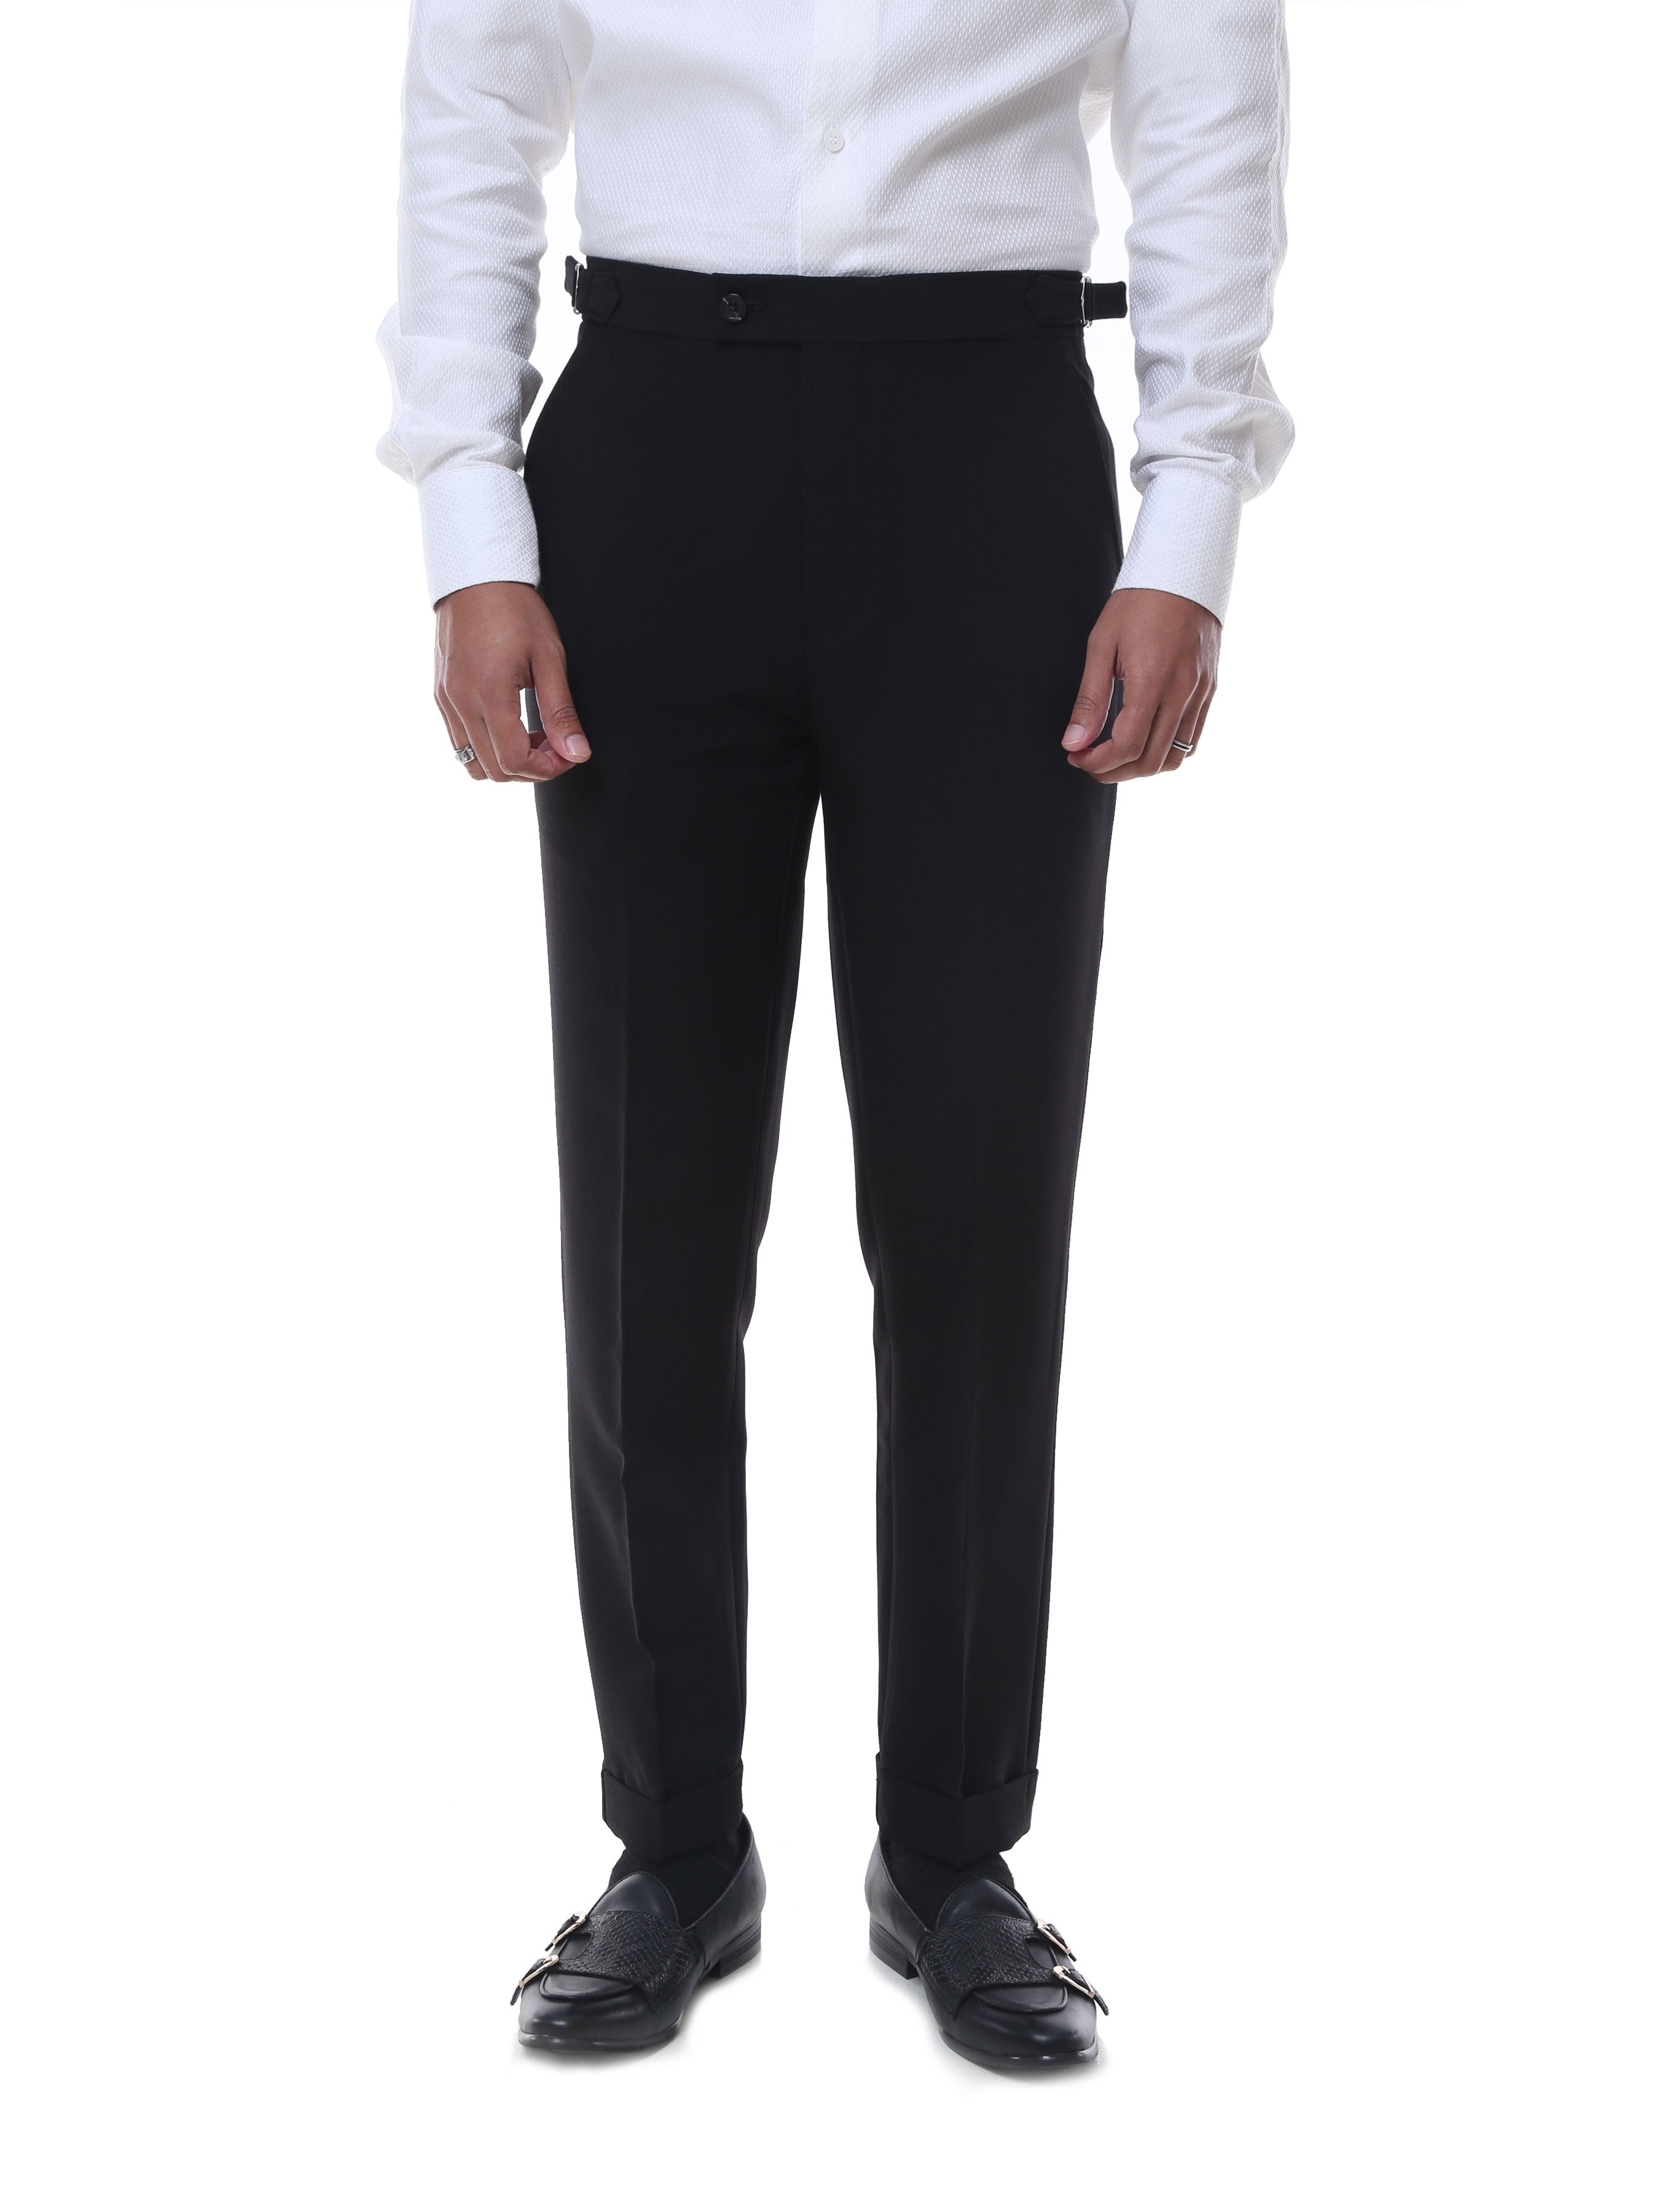 Why Do Some Suit Trousers Have Tabs on the Side? – StudioSuits